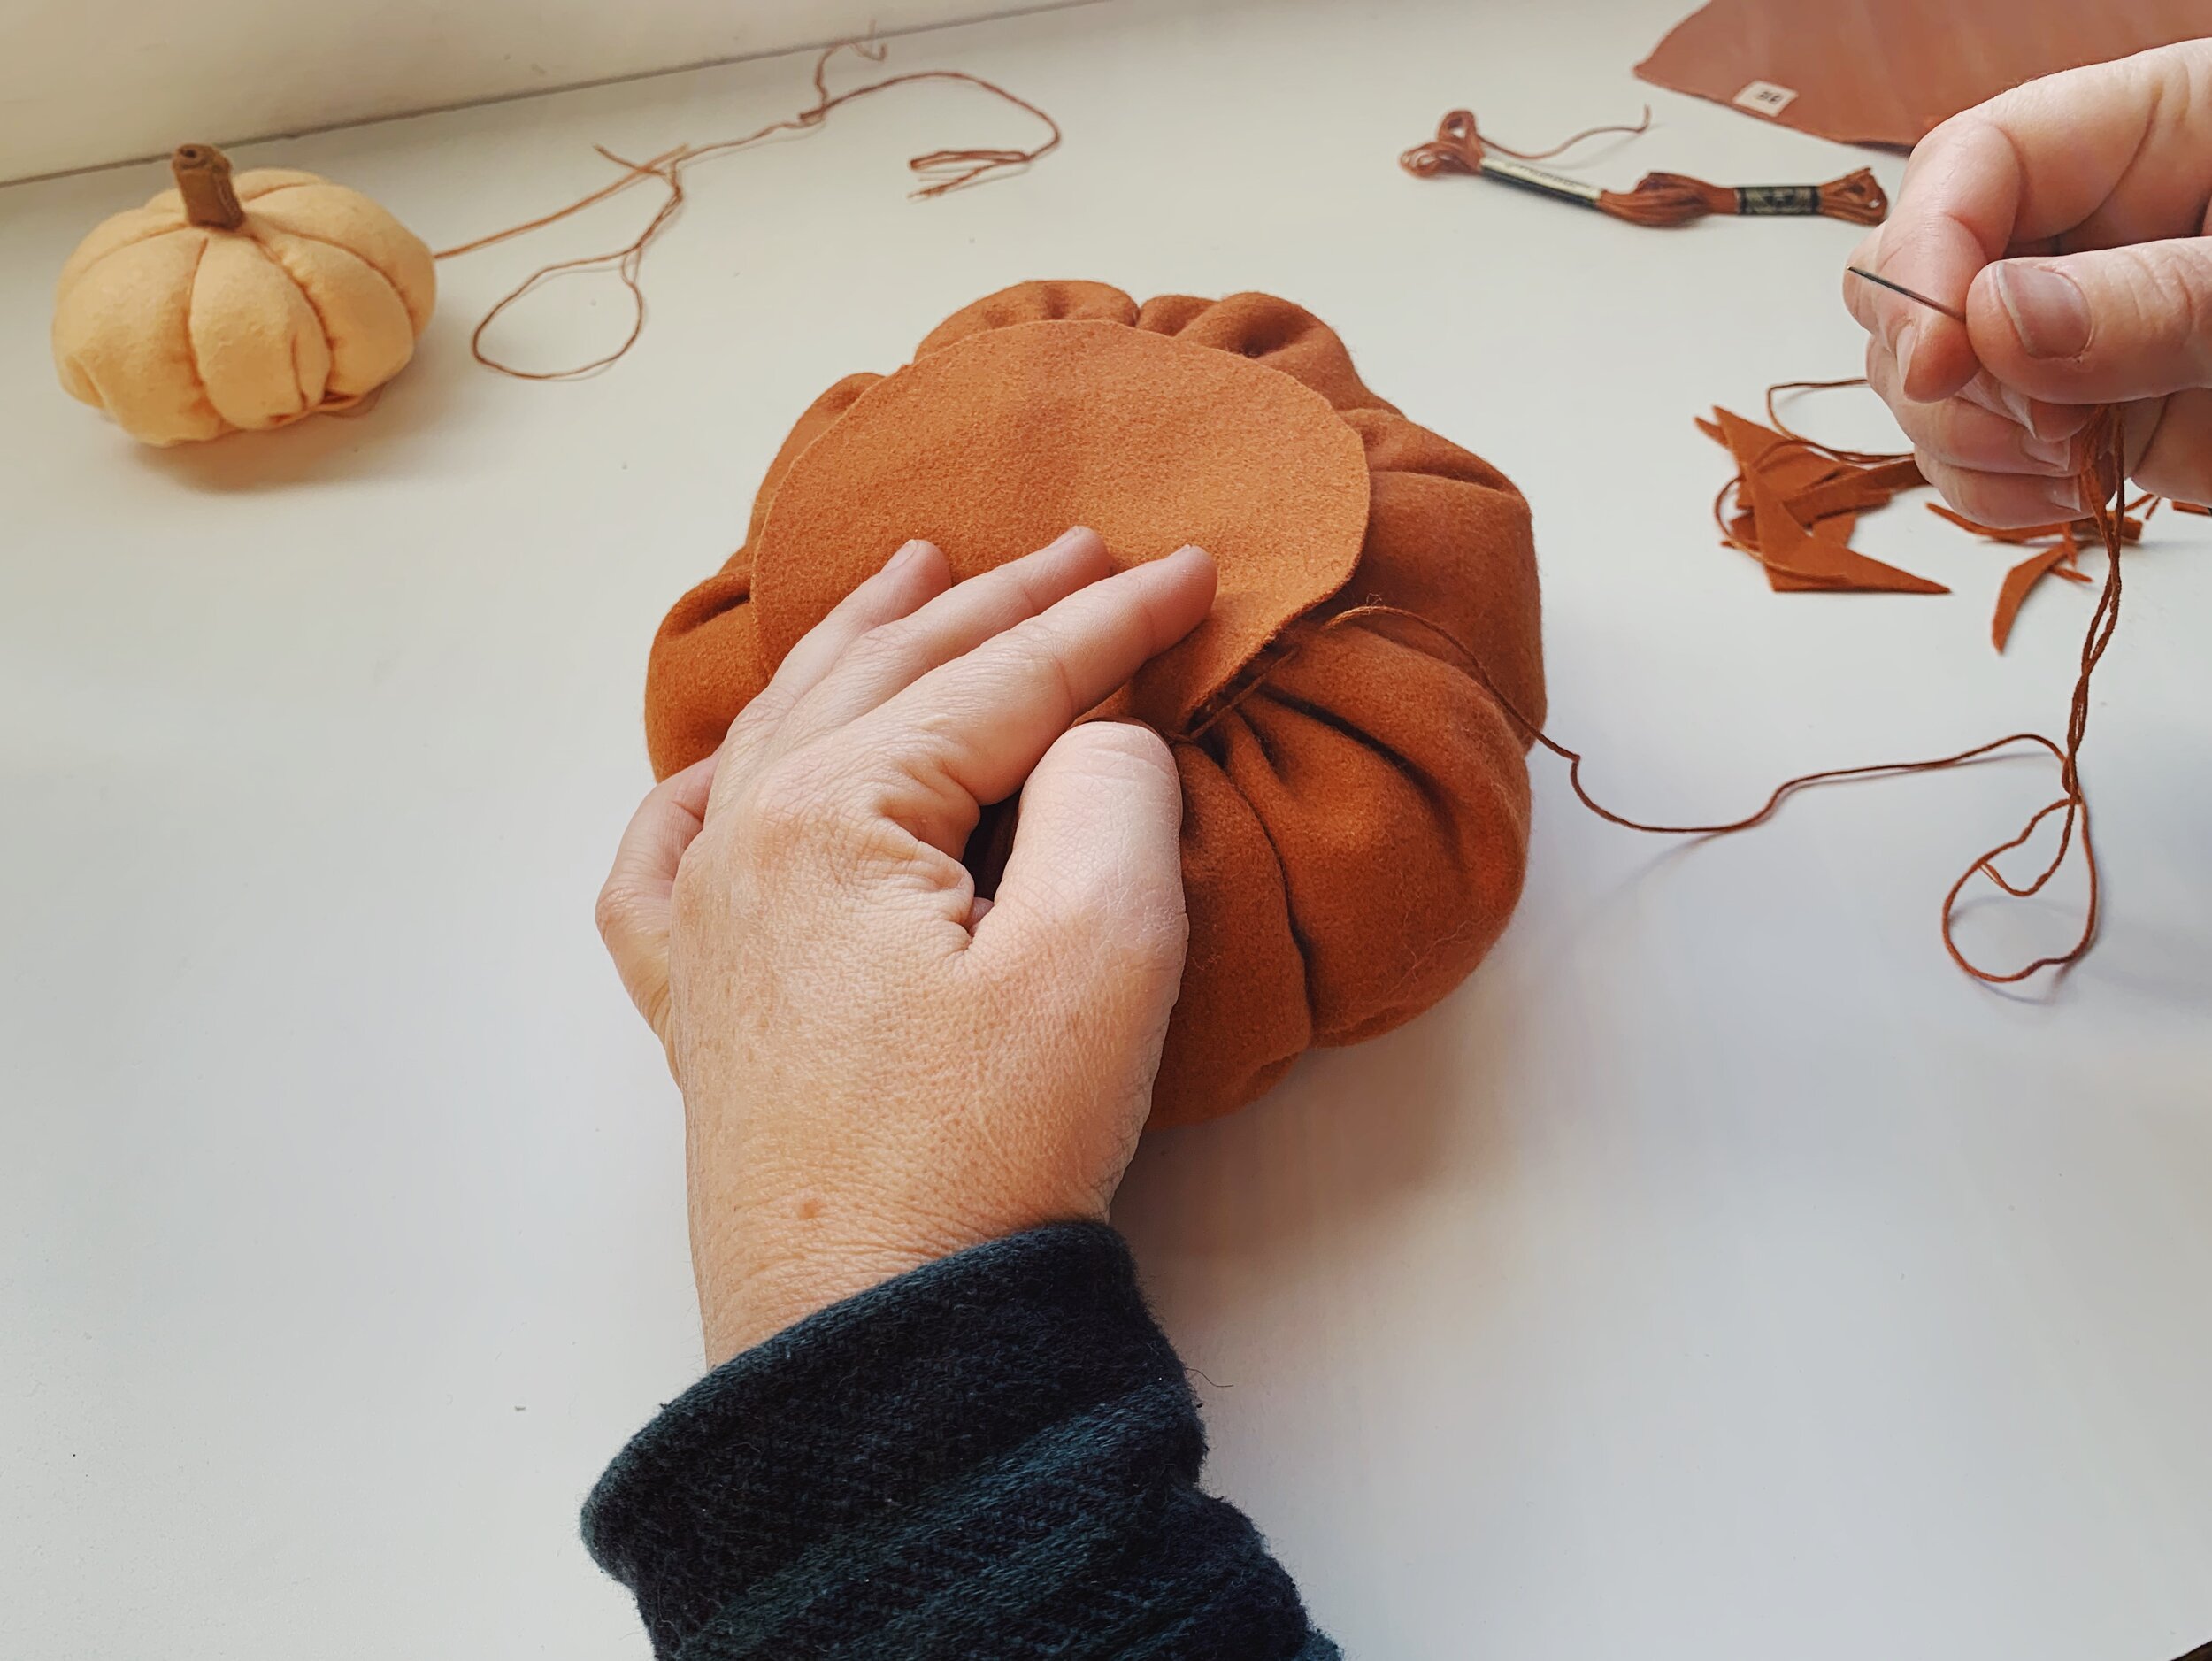 Stitch the circle to the base of the pumpkin